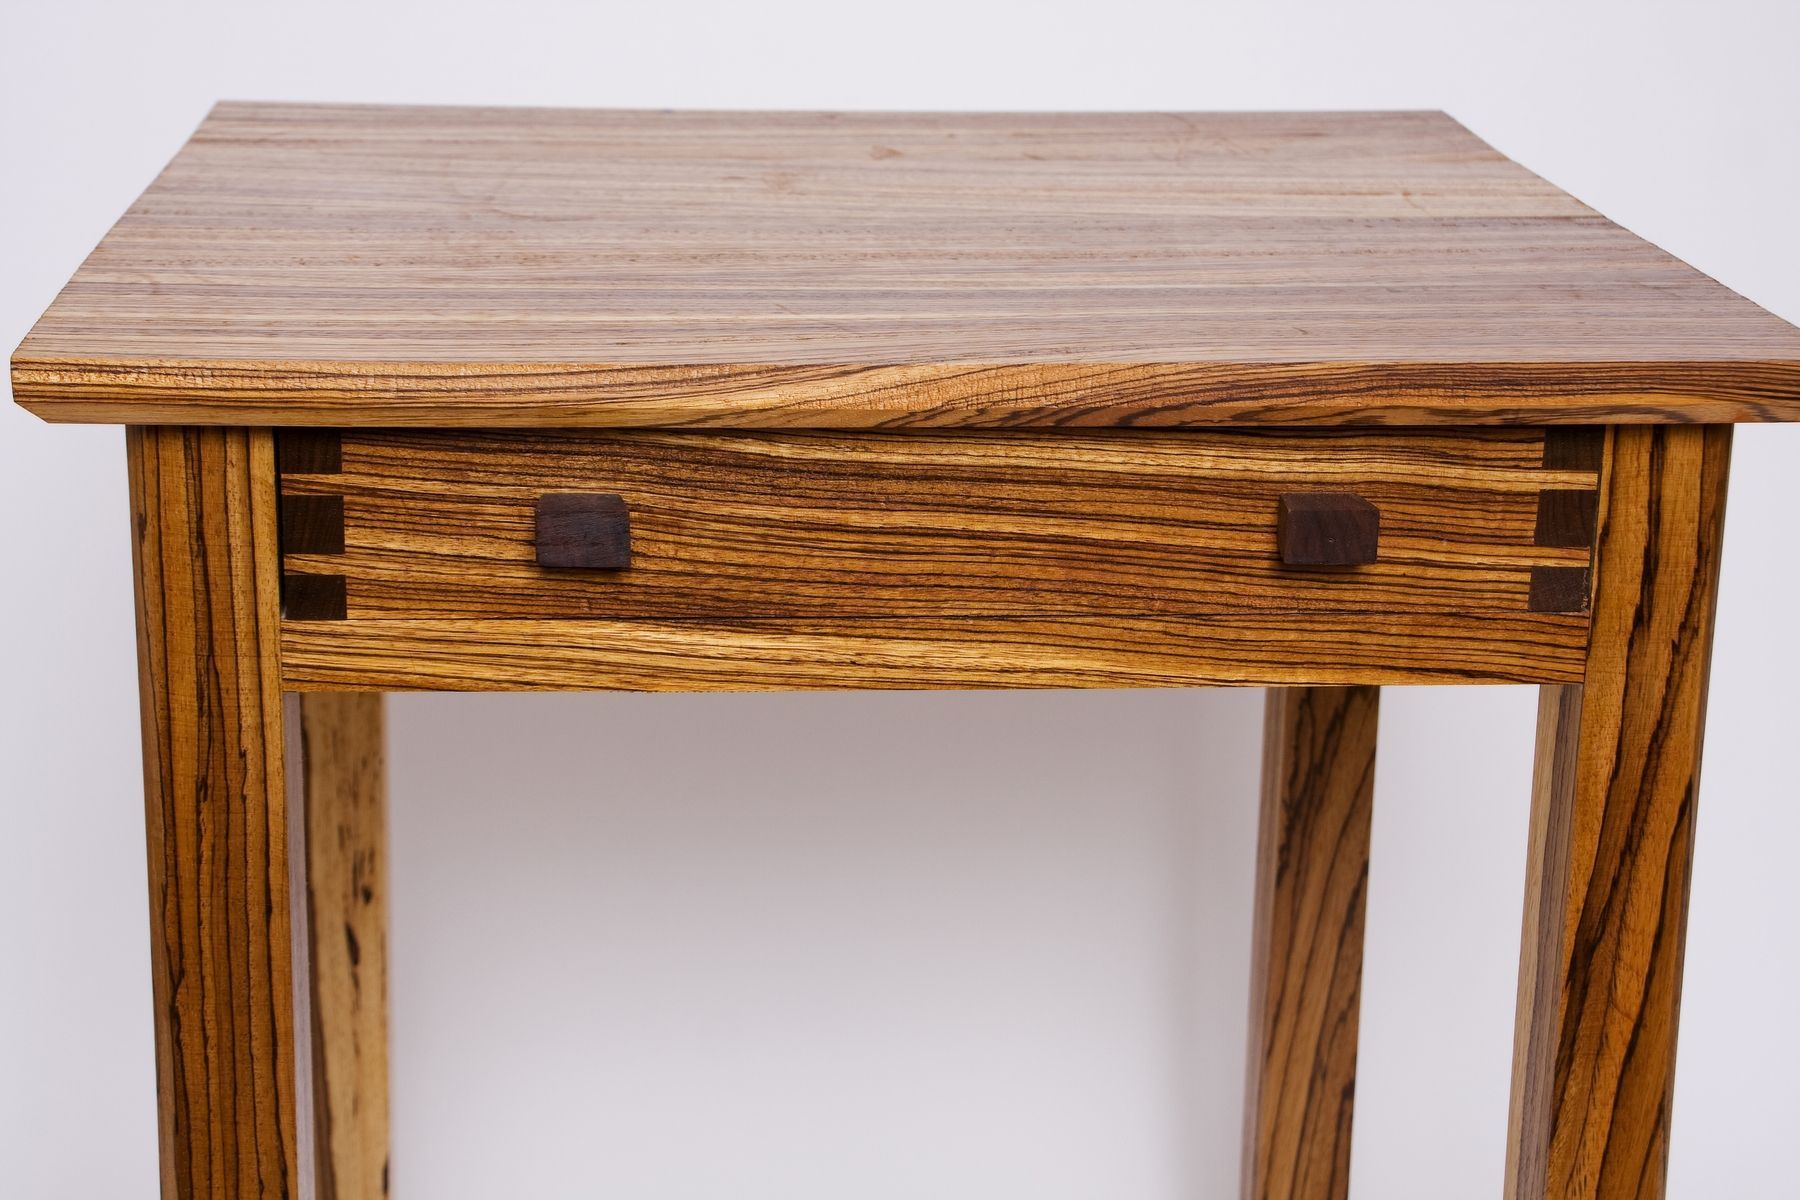 Zebra Wood Side Table | Zebra Wood, Side Table Wood, Wood Throughout Wood Veneer Console Tables (View 2 of 20)